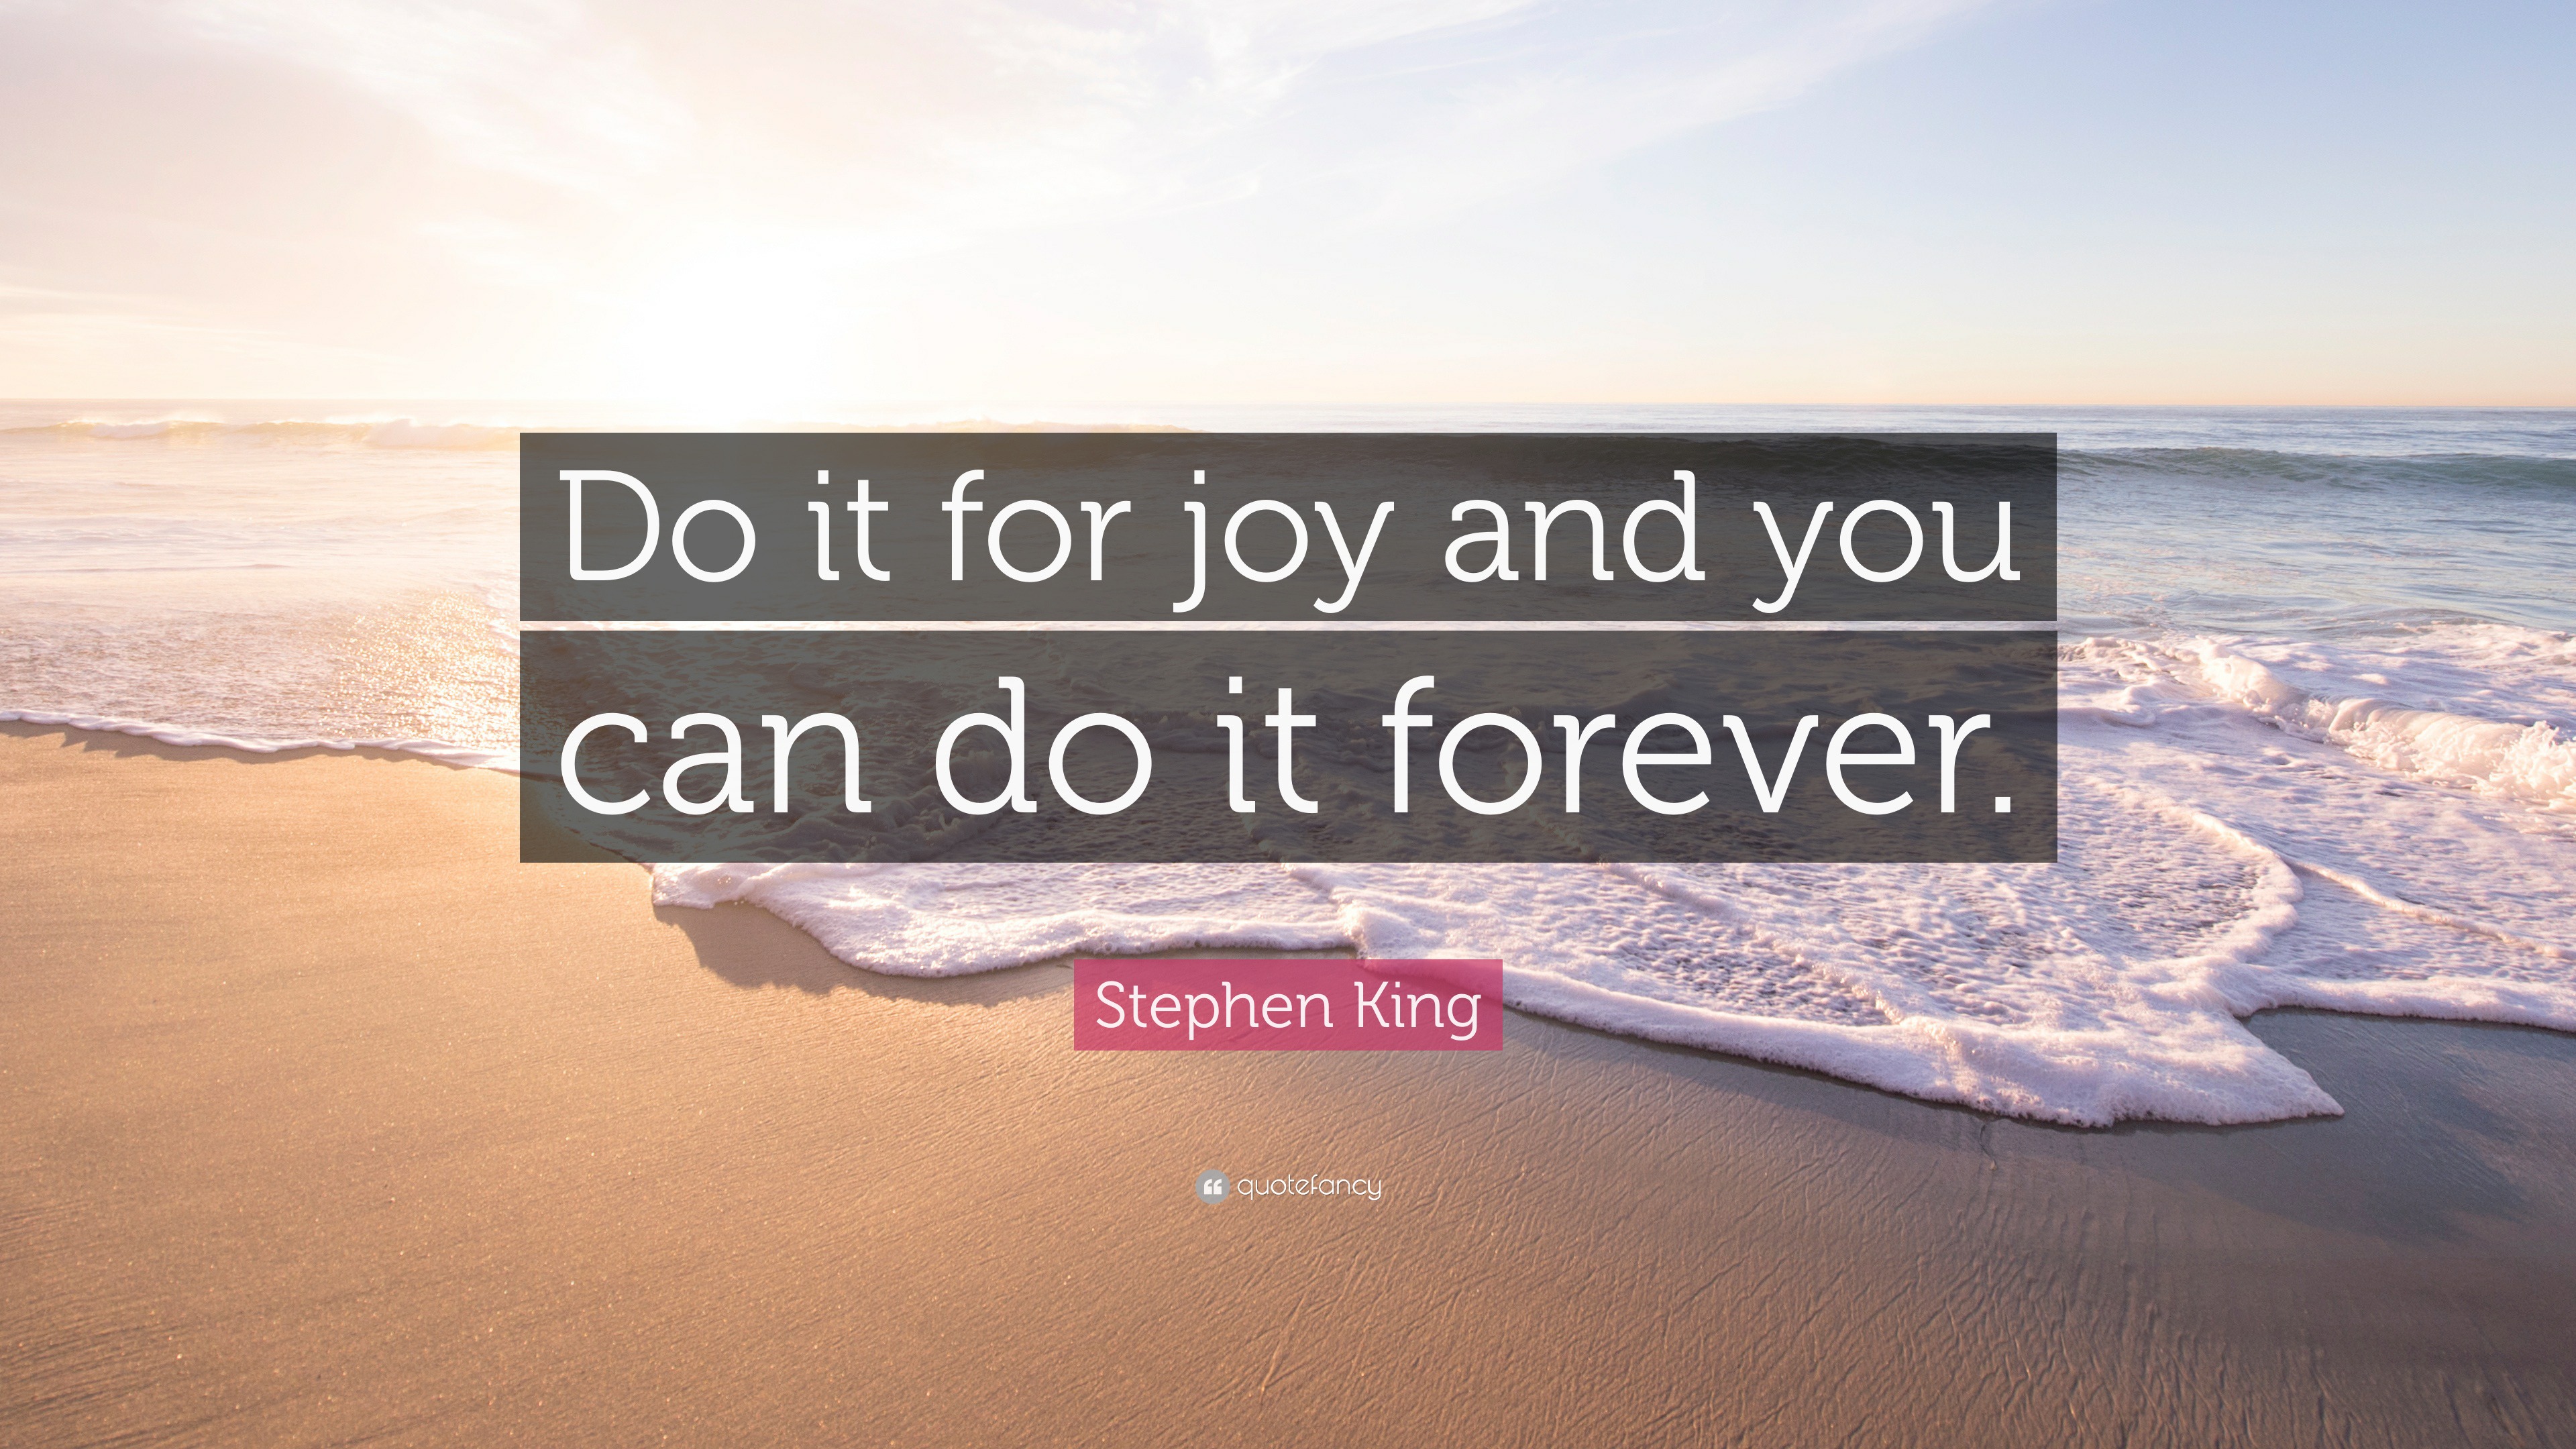 Stephen King Quote: “Do it for joy and you can do it forever.”